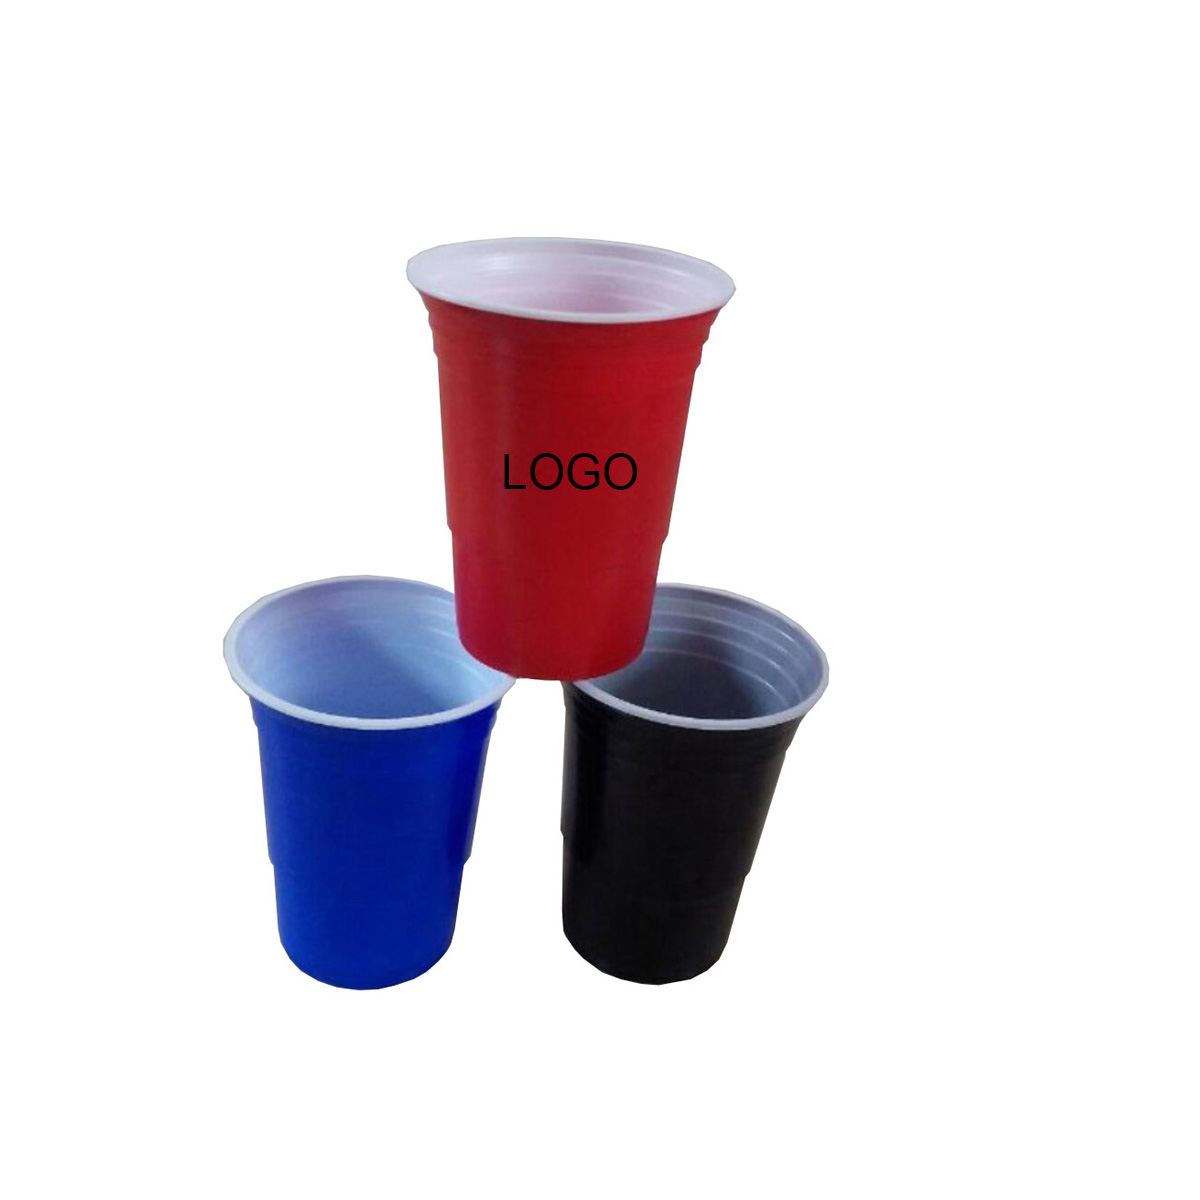 The Nice Solo Cup